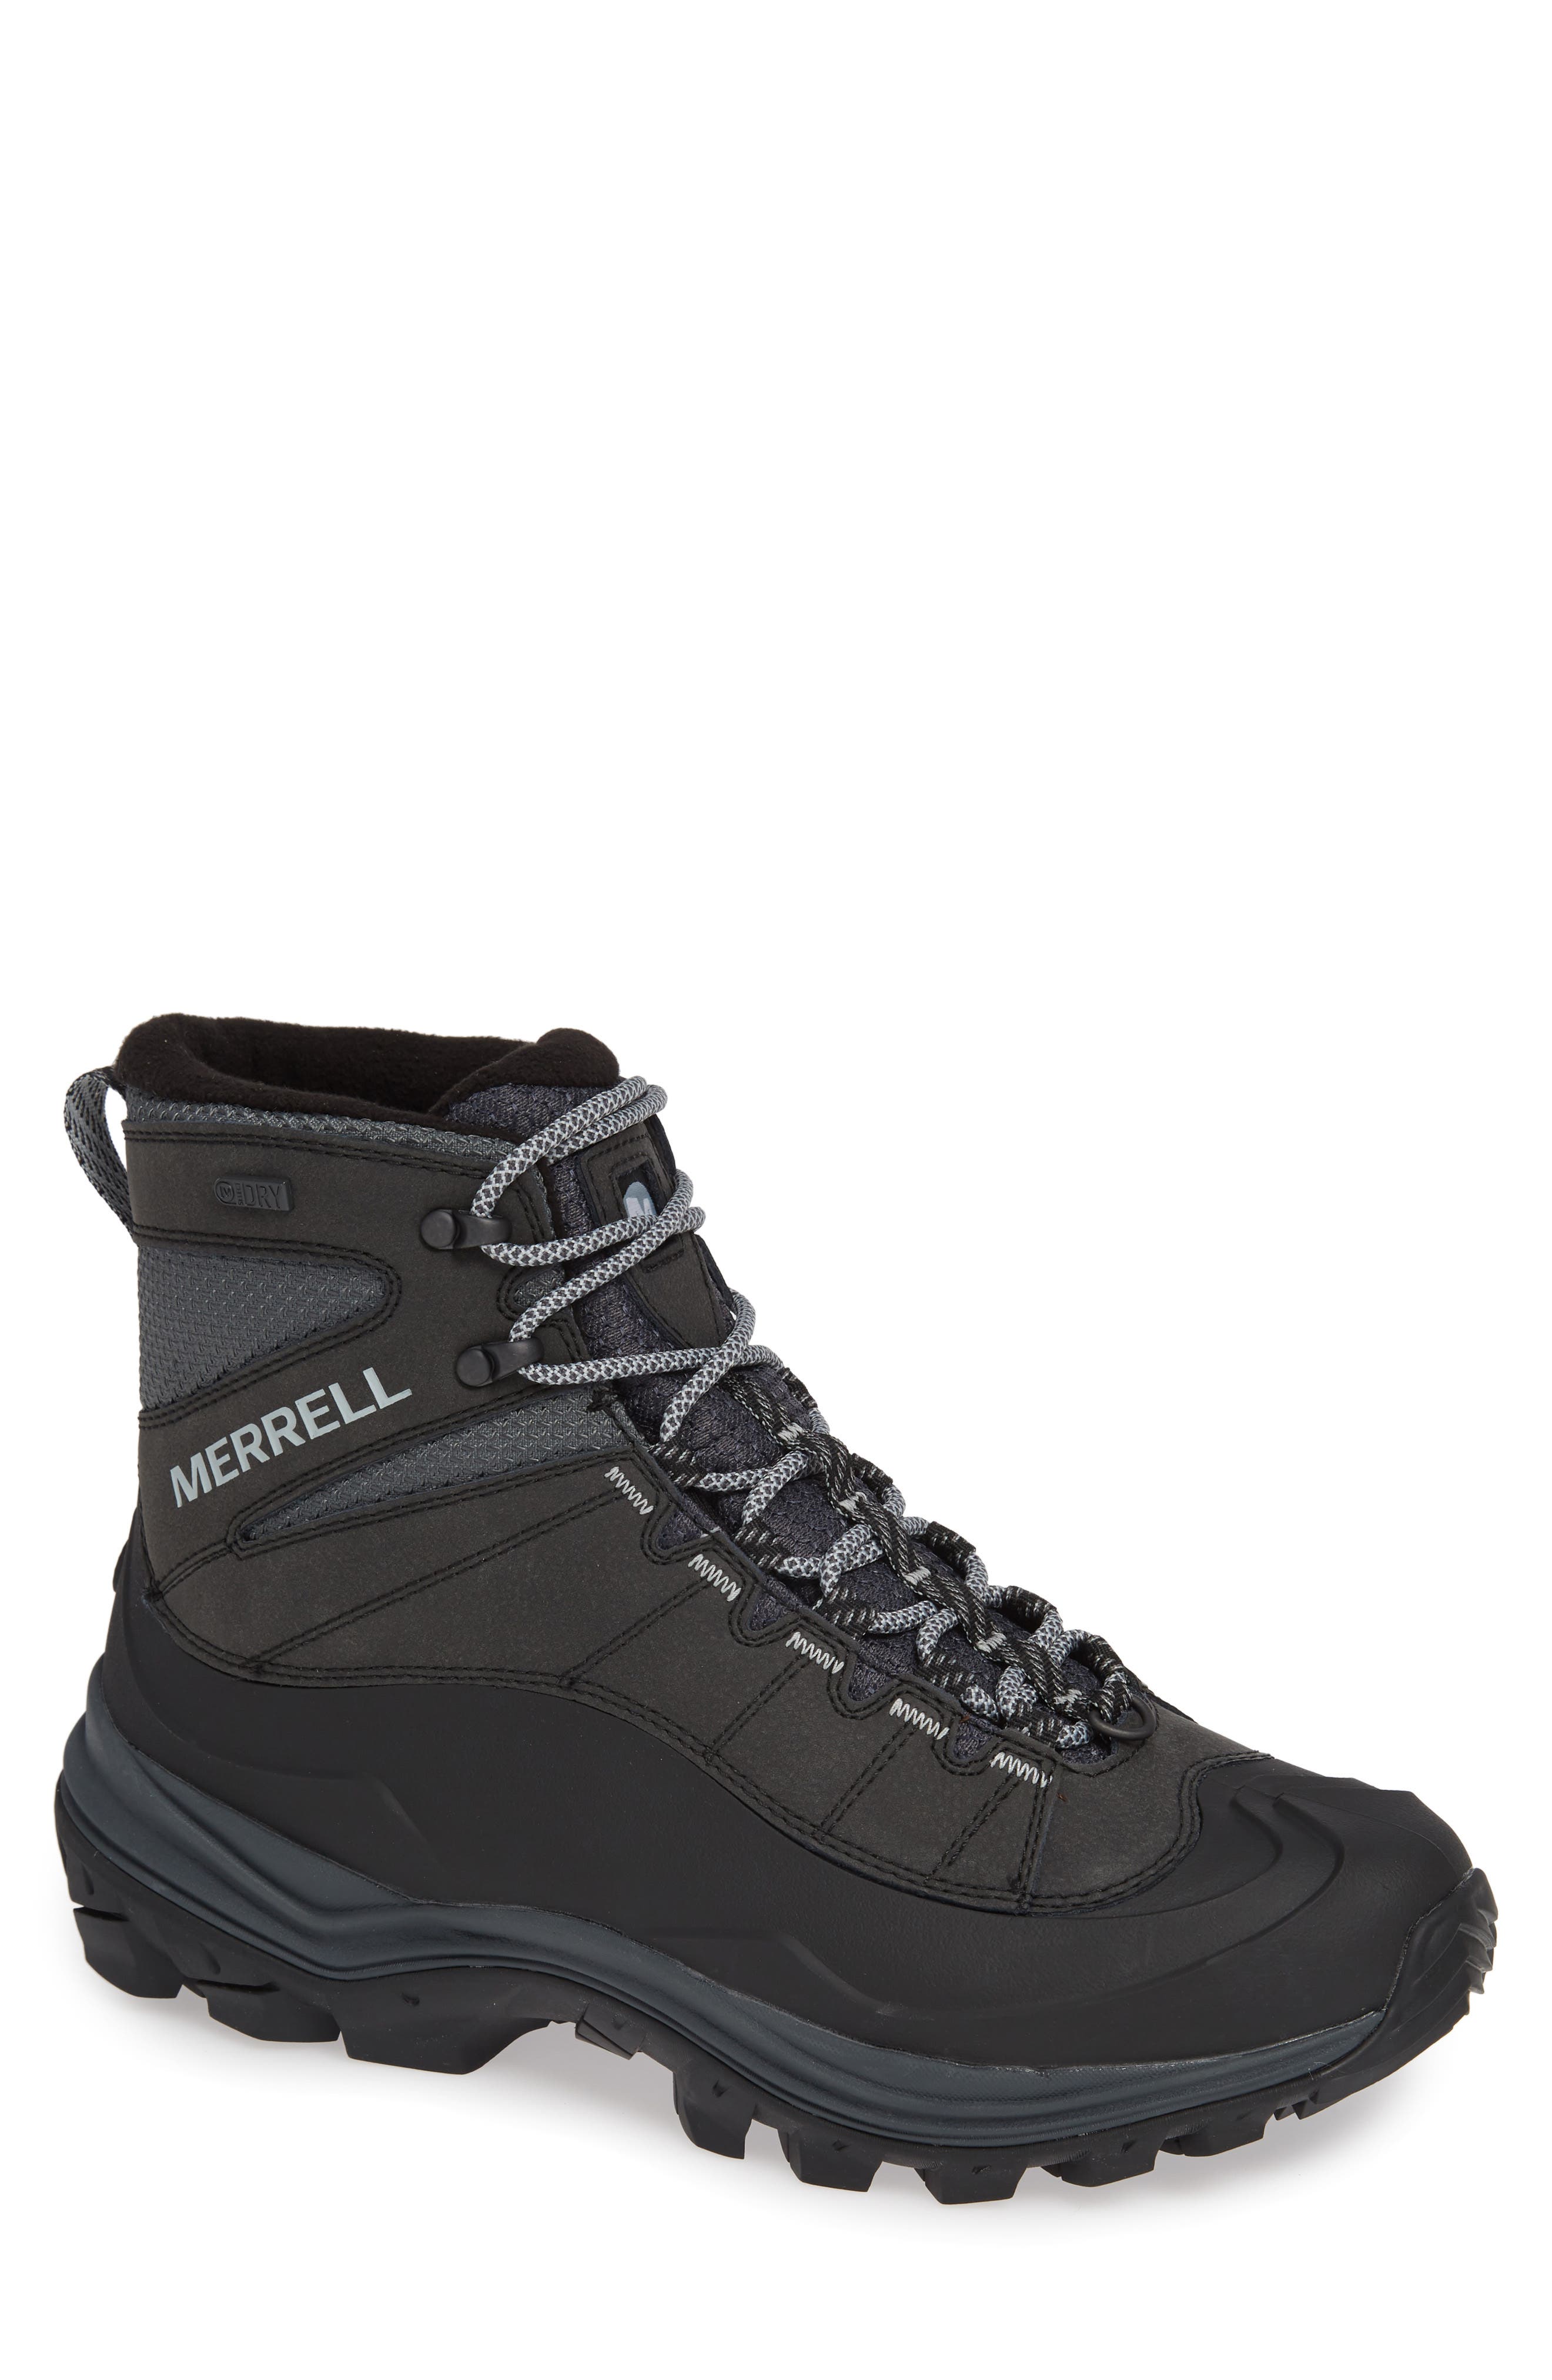 merrell thermo chill walking boots mens